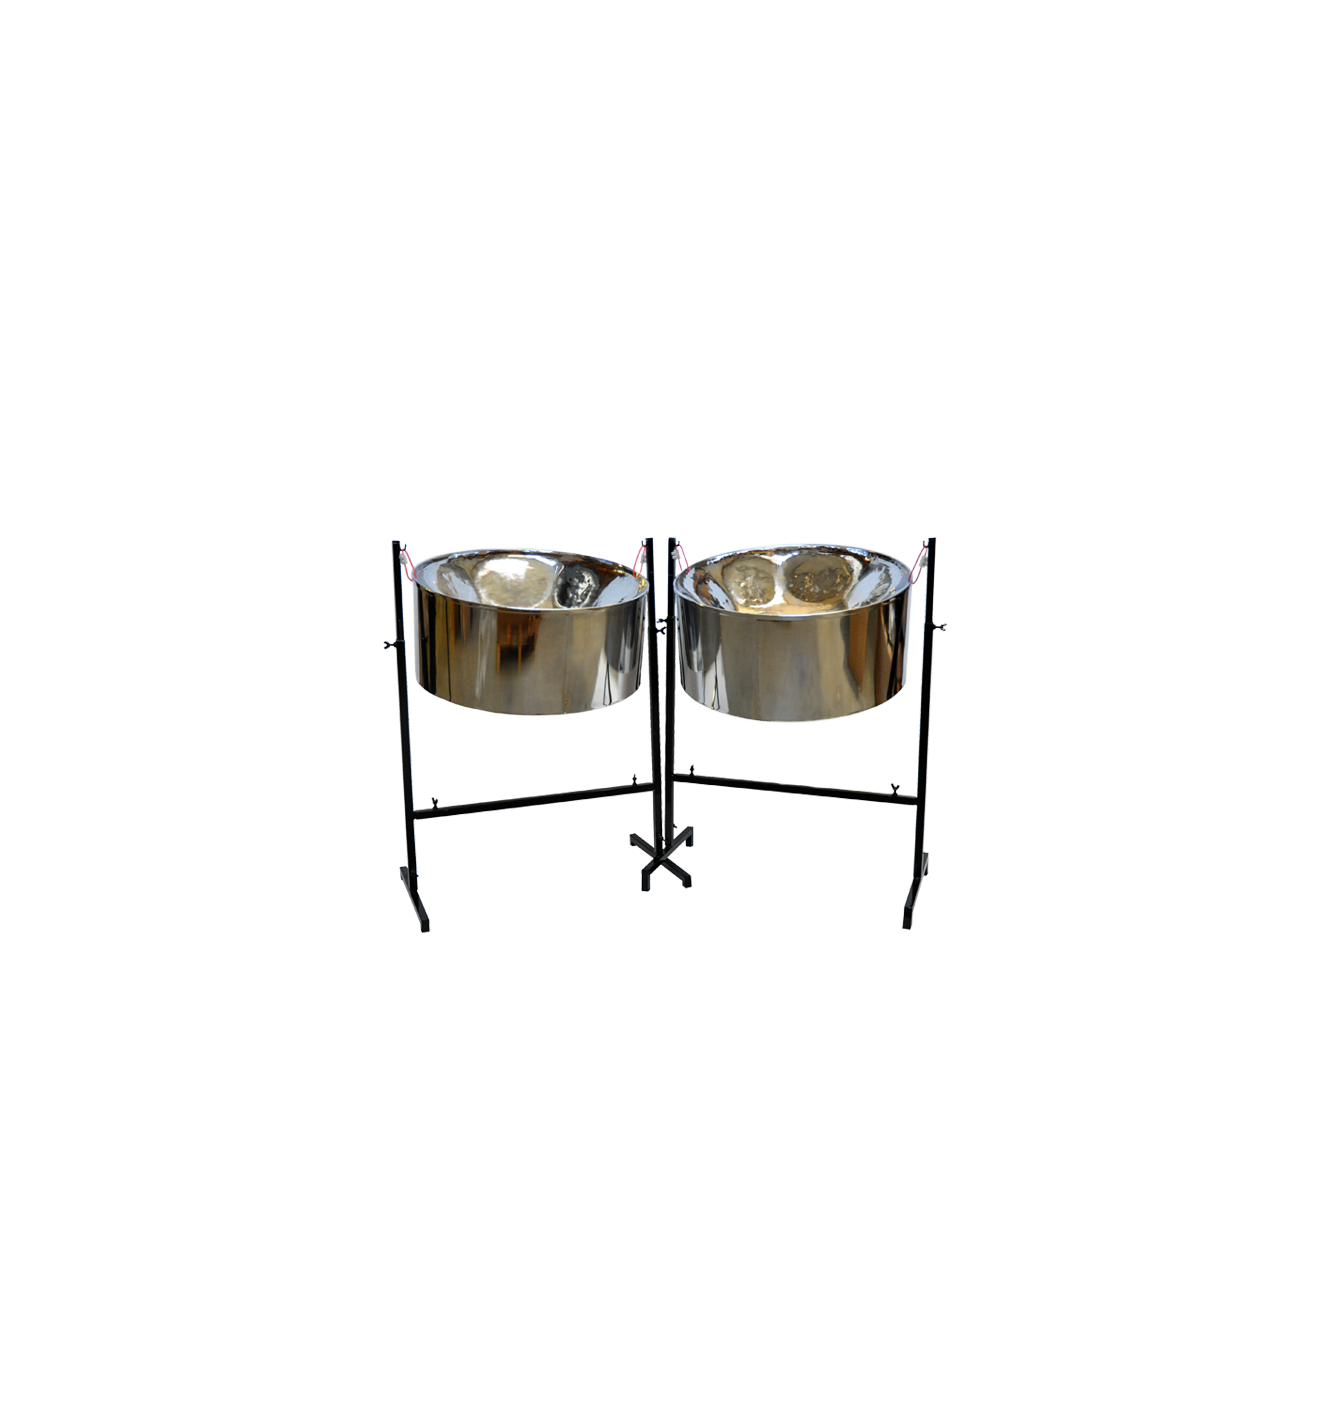 Double Second steeldrum - Steelpan - Steeldrums - Professional steelpans  imported from Trinidad and Tobago